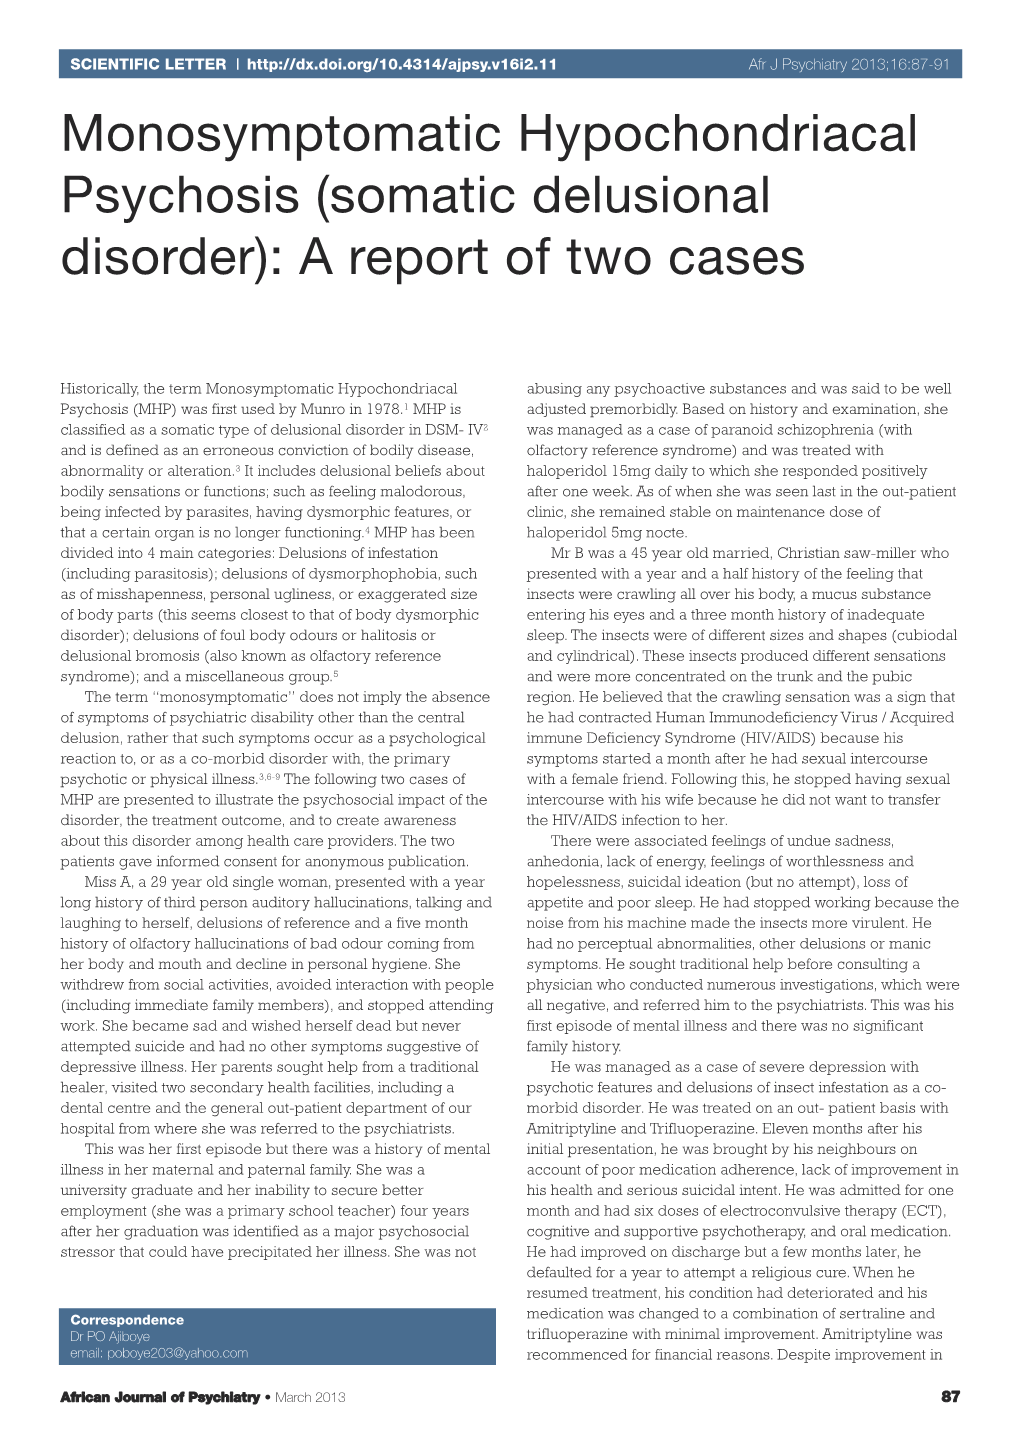 Monosymptomatic Hypochondriacal Psychosis (Somatic Delusional Disorder): a Report of Two Cases